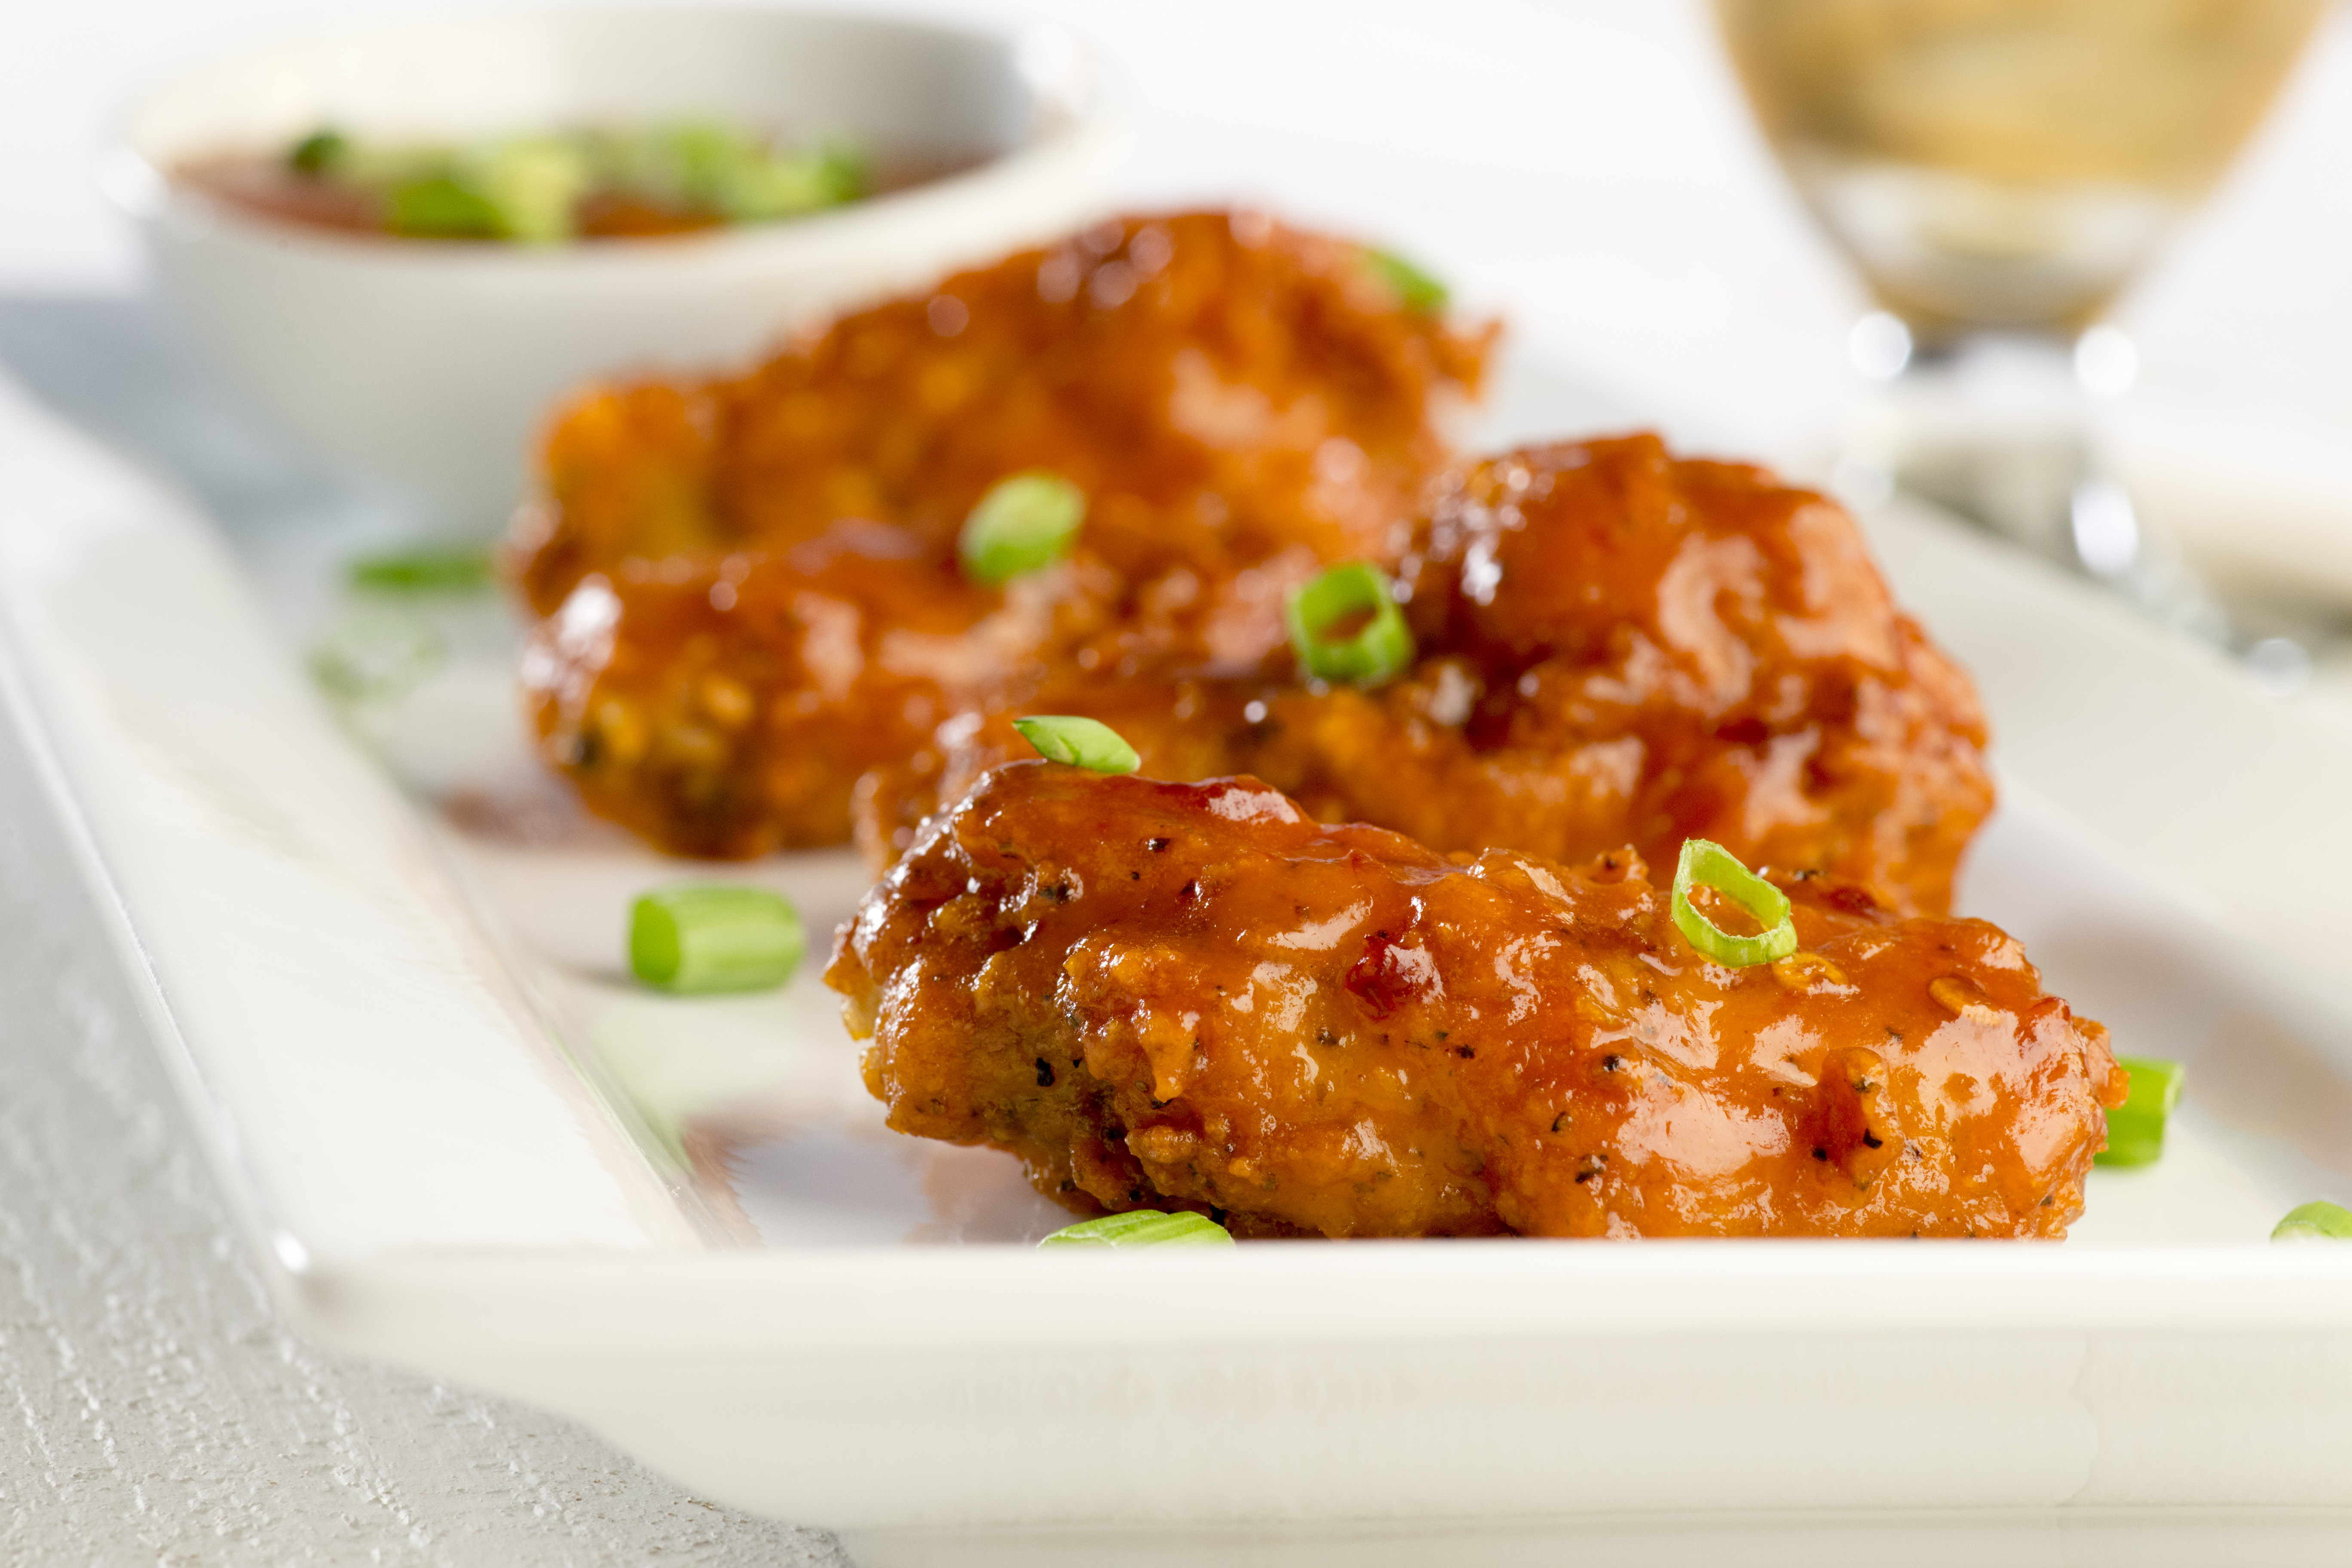 Dad's sure to love these Crispy Maple Chipotle Hot Wings. We added the craveable smoky-sweet flavor combination of rich maple syrup and smoky-hot chipotle chilies in fiery adobo sauce to our favorite hot wing recipe for a bold flavor upgrade!